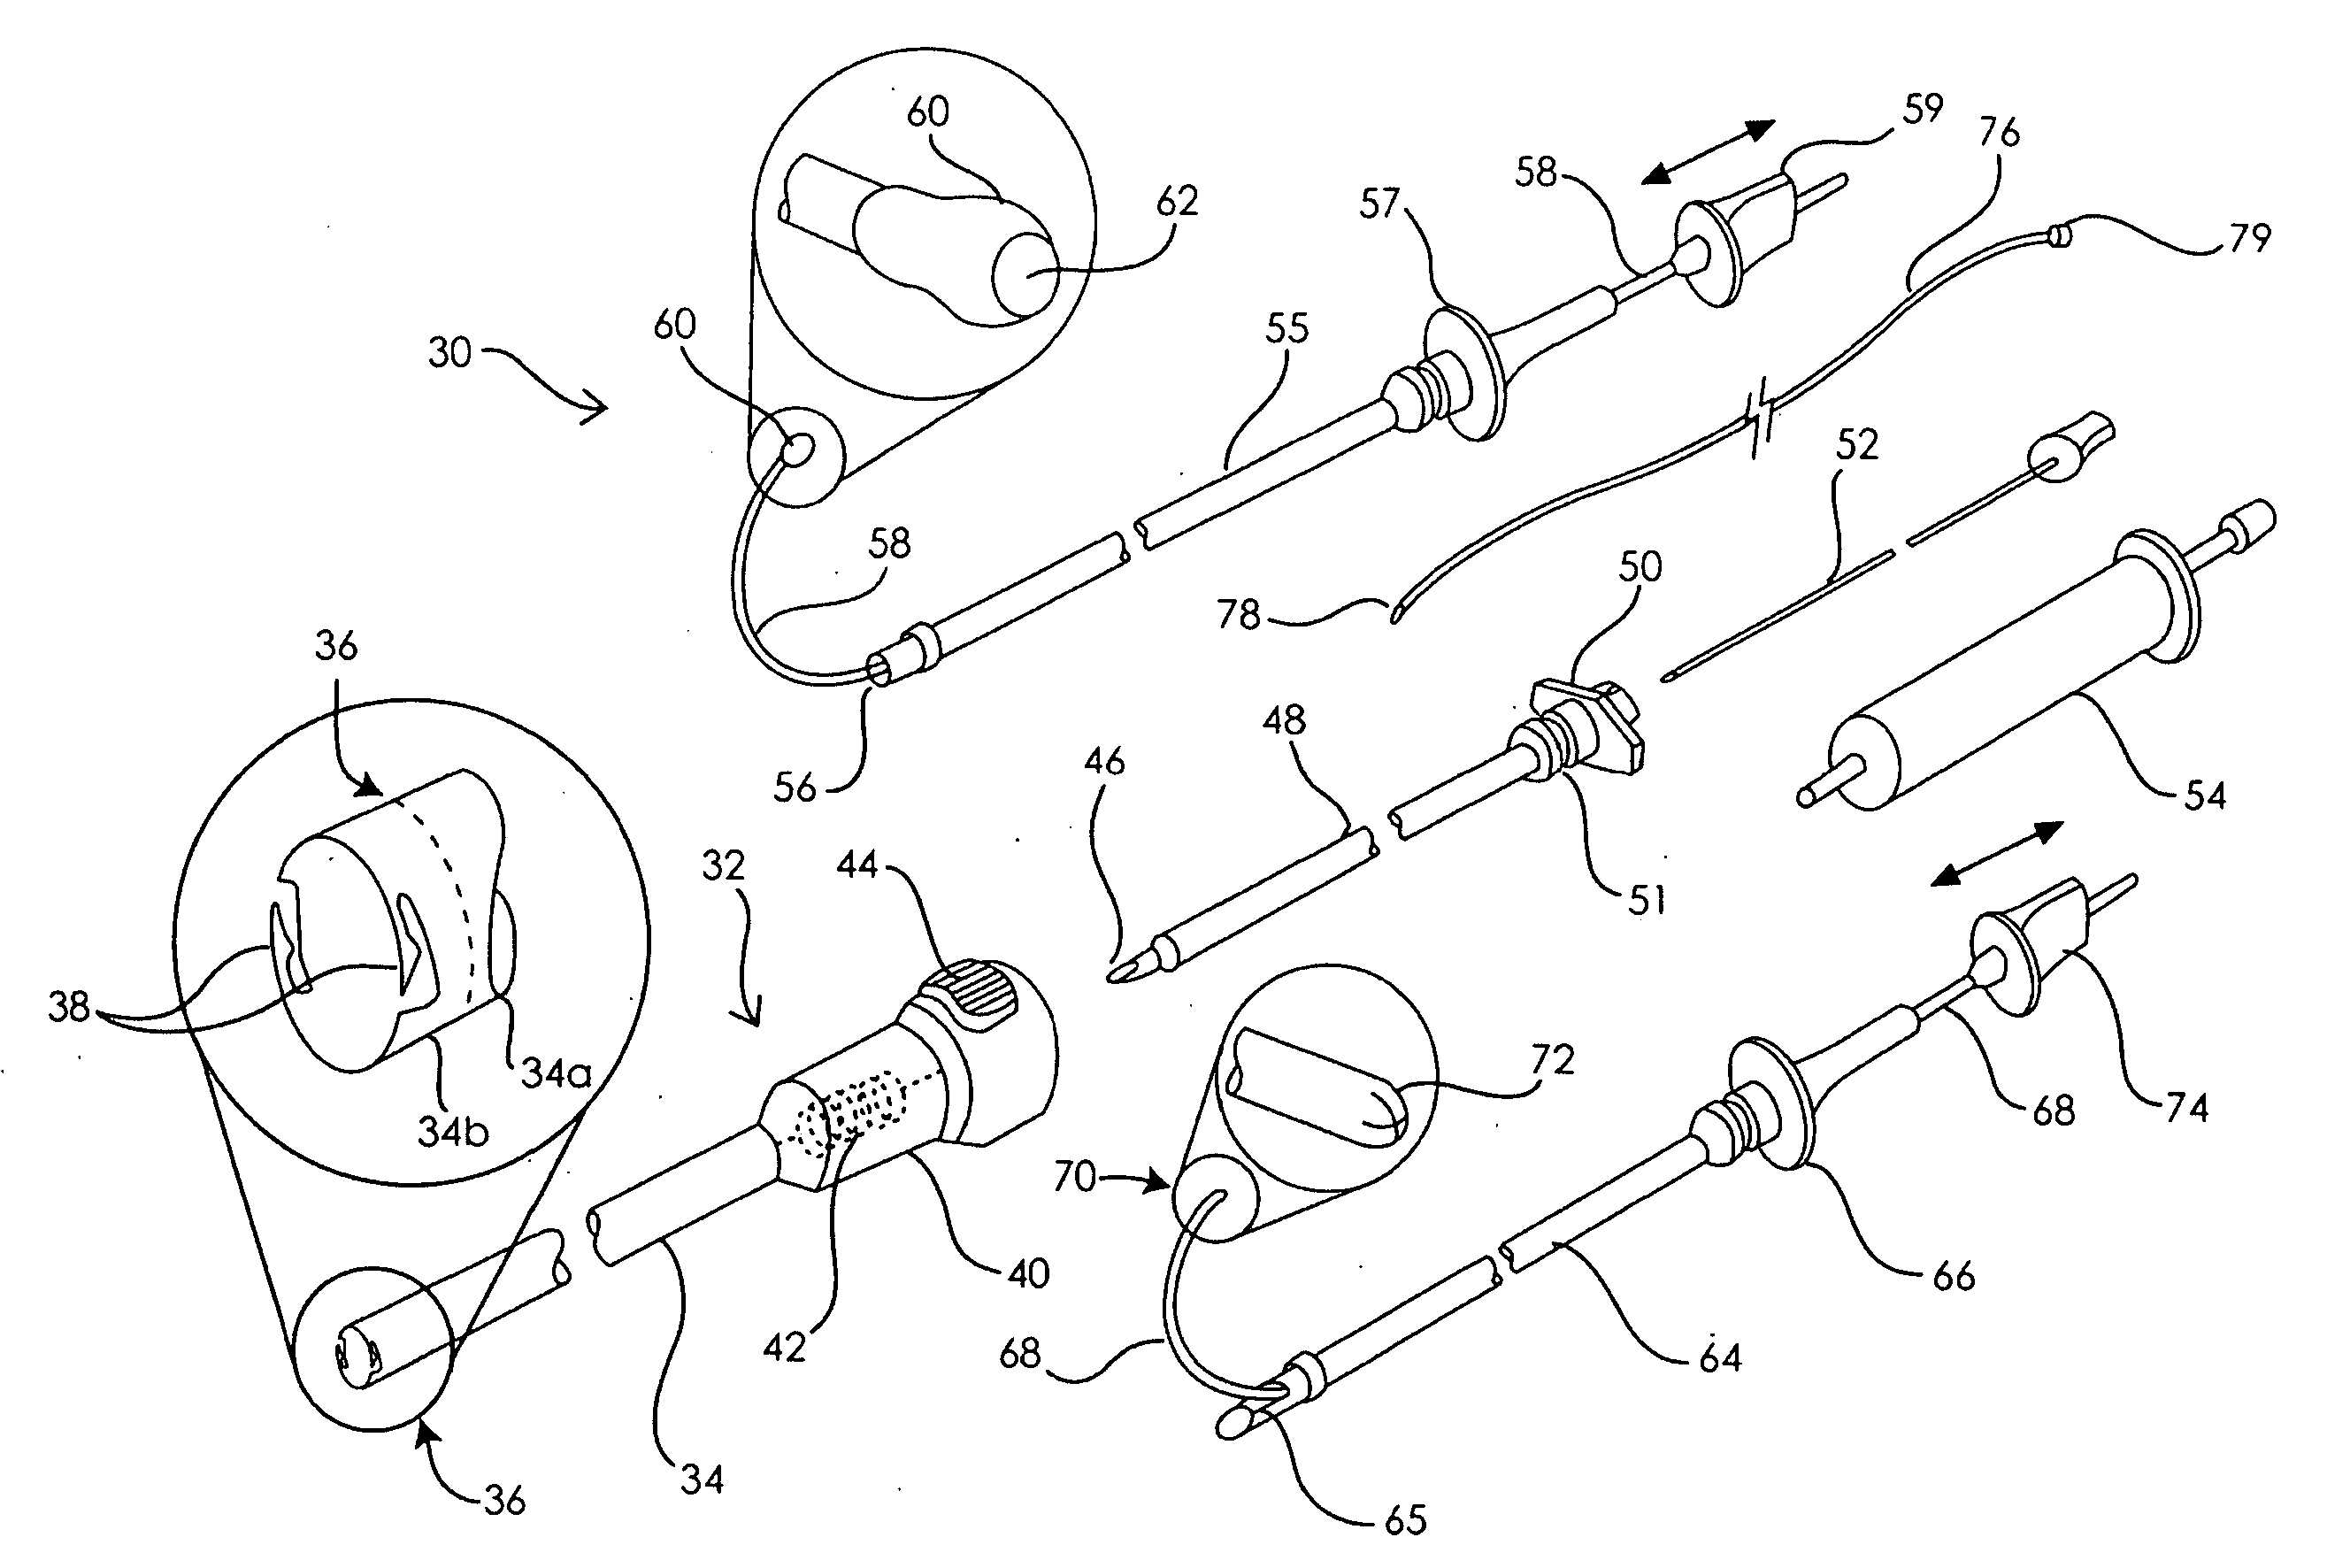 Spinal access system and method